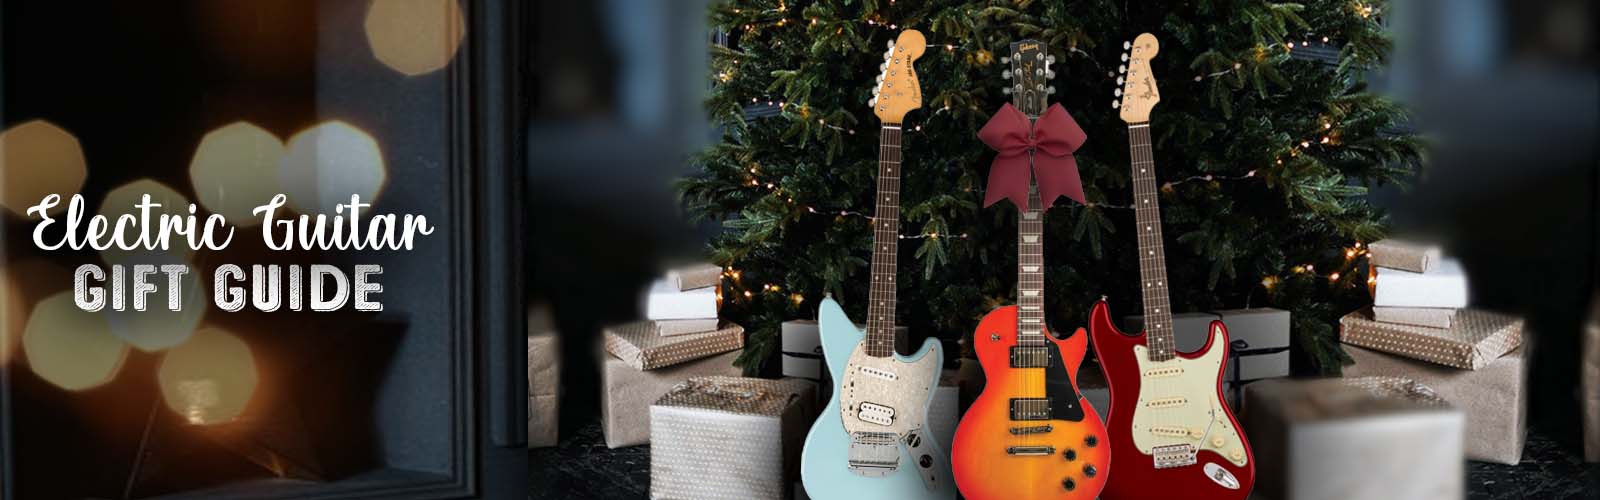 Electric Guitar Gift Guide Banner